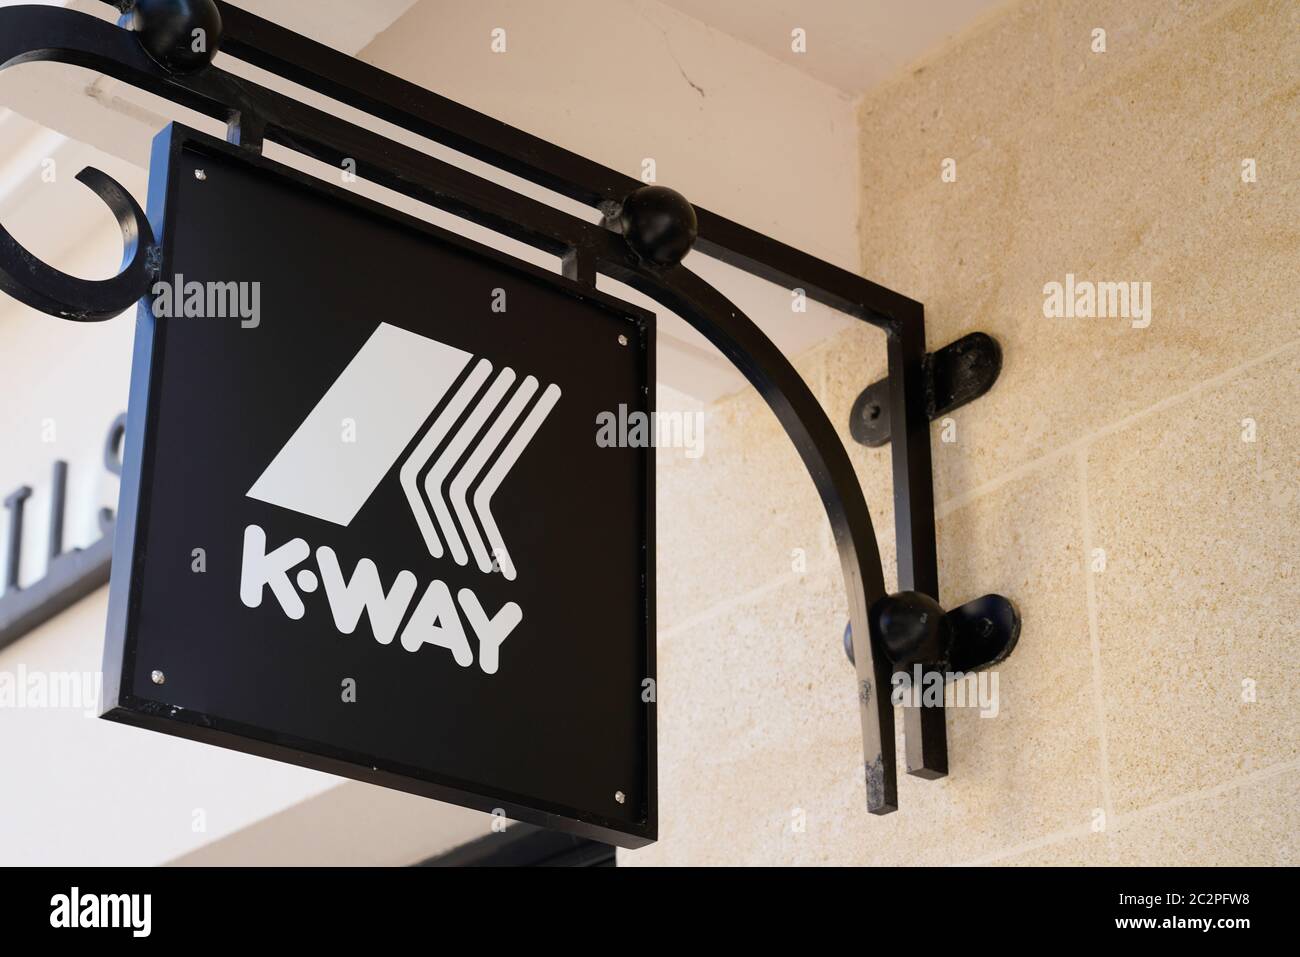 Bordeaux , Aquitaine / France - 06 14 2020 : k-way logo sign of french store  outlet raincoat and rainproof shop Stock Photo